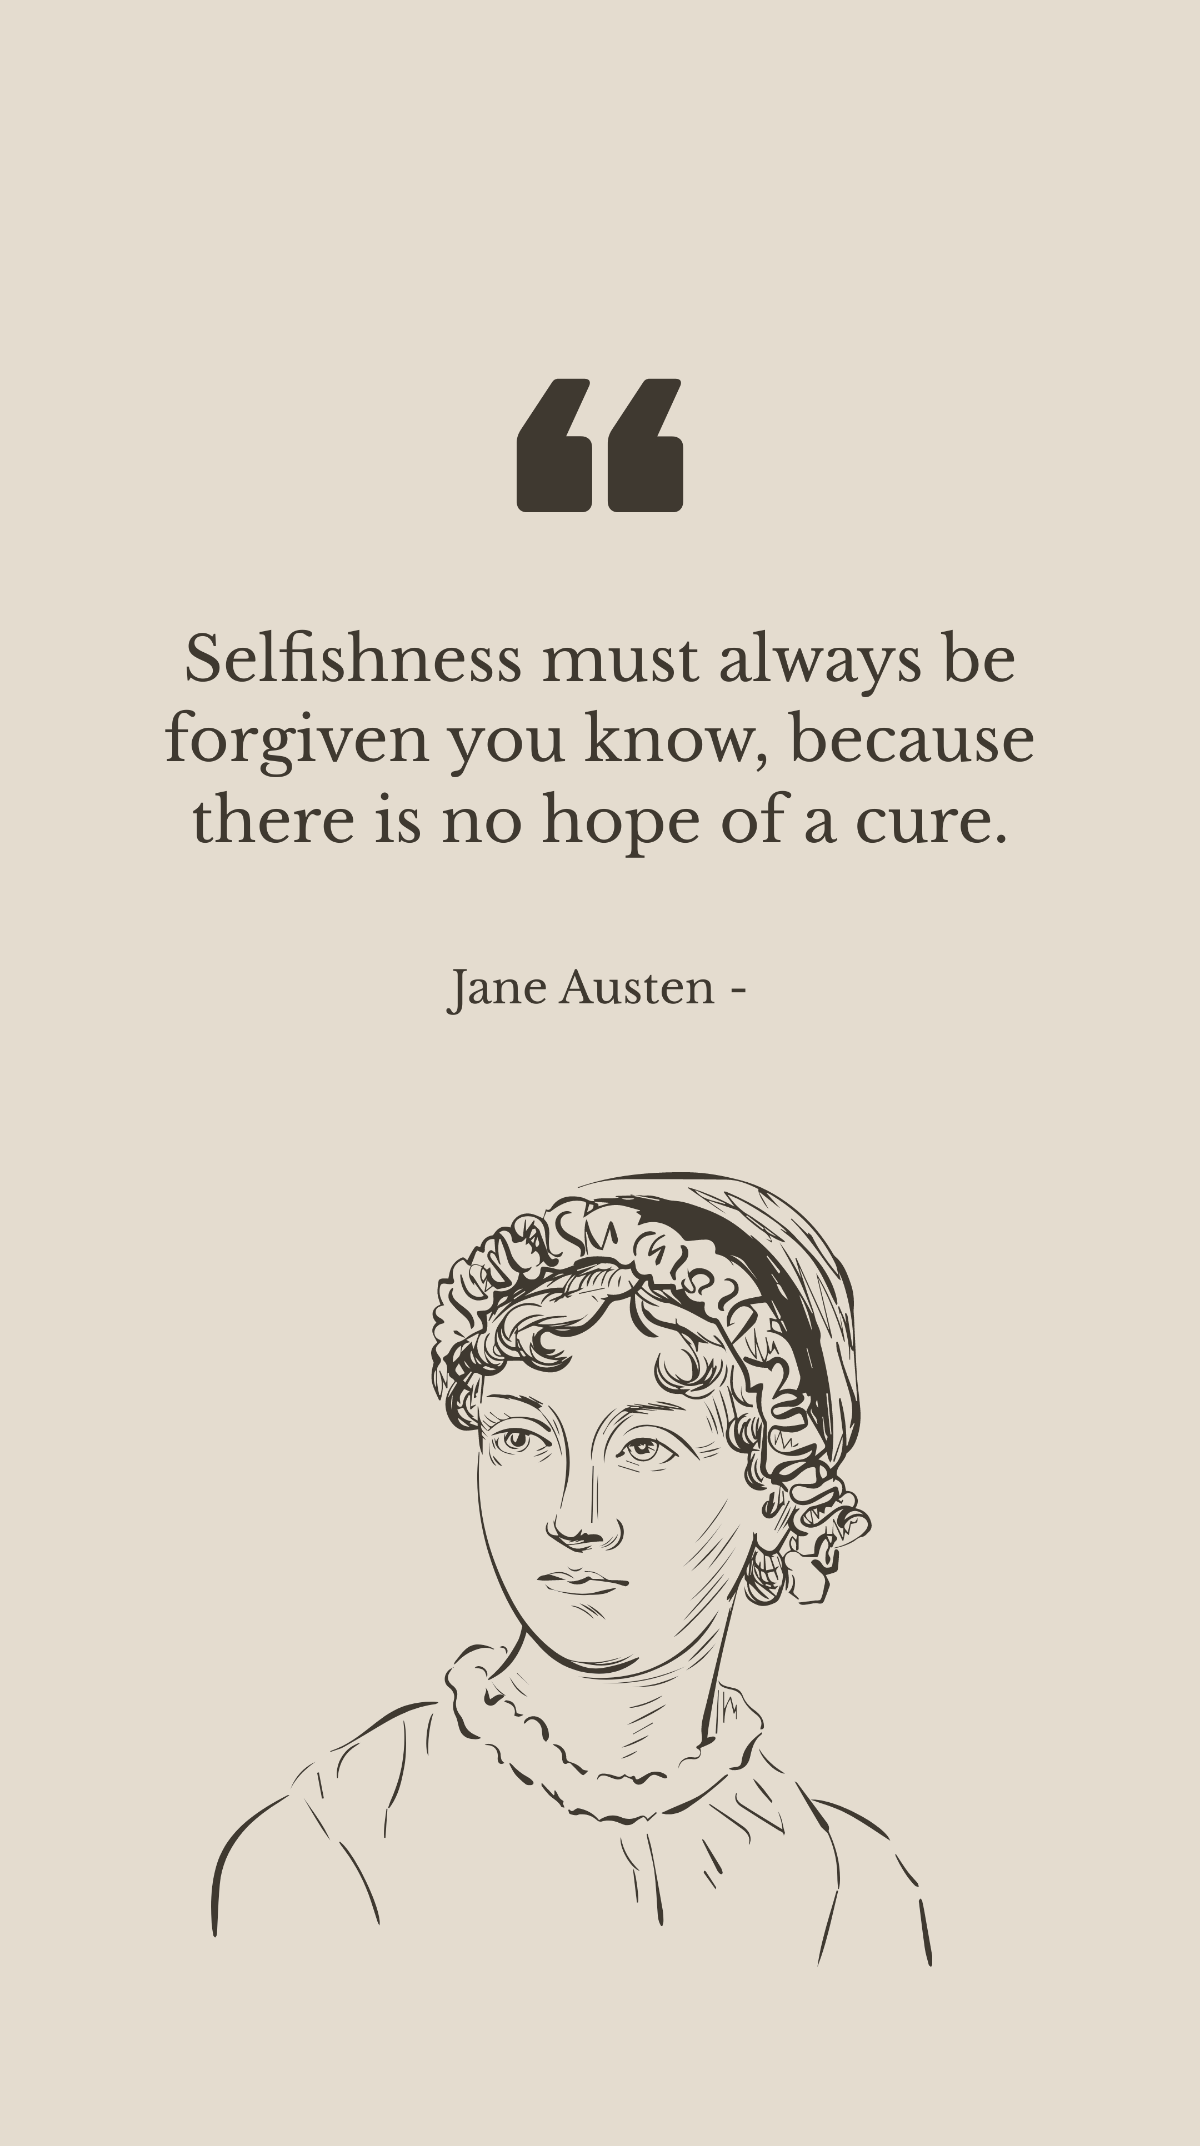 Jane Austen - Selfishness must always be forgiven you know, because there is no hope of a cure.